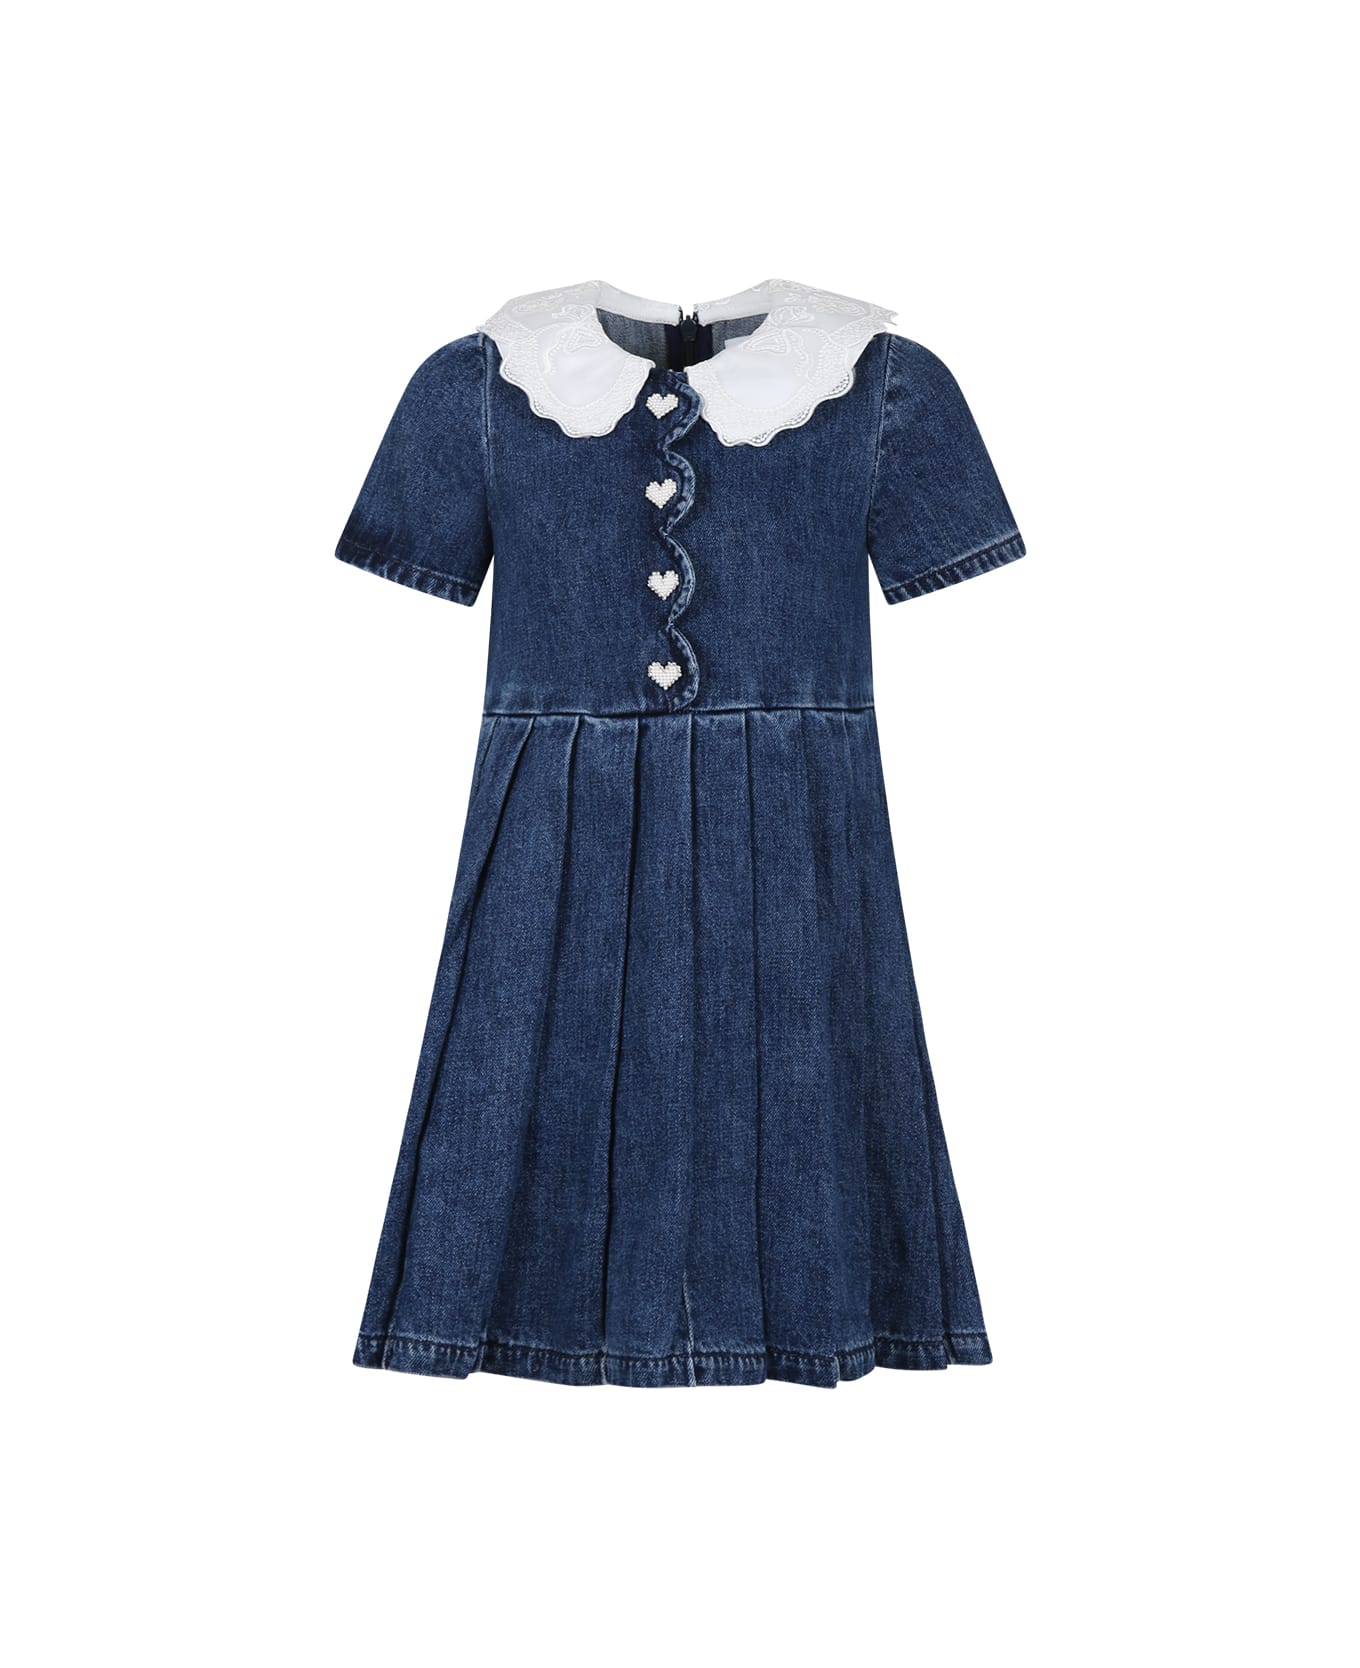 self-portrait Blue Dress Forg Irl With Embroidered Lace - Denim